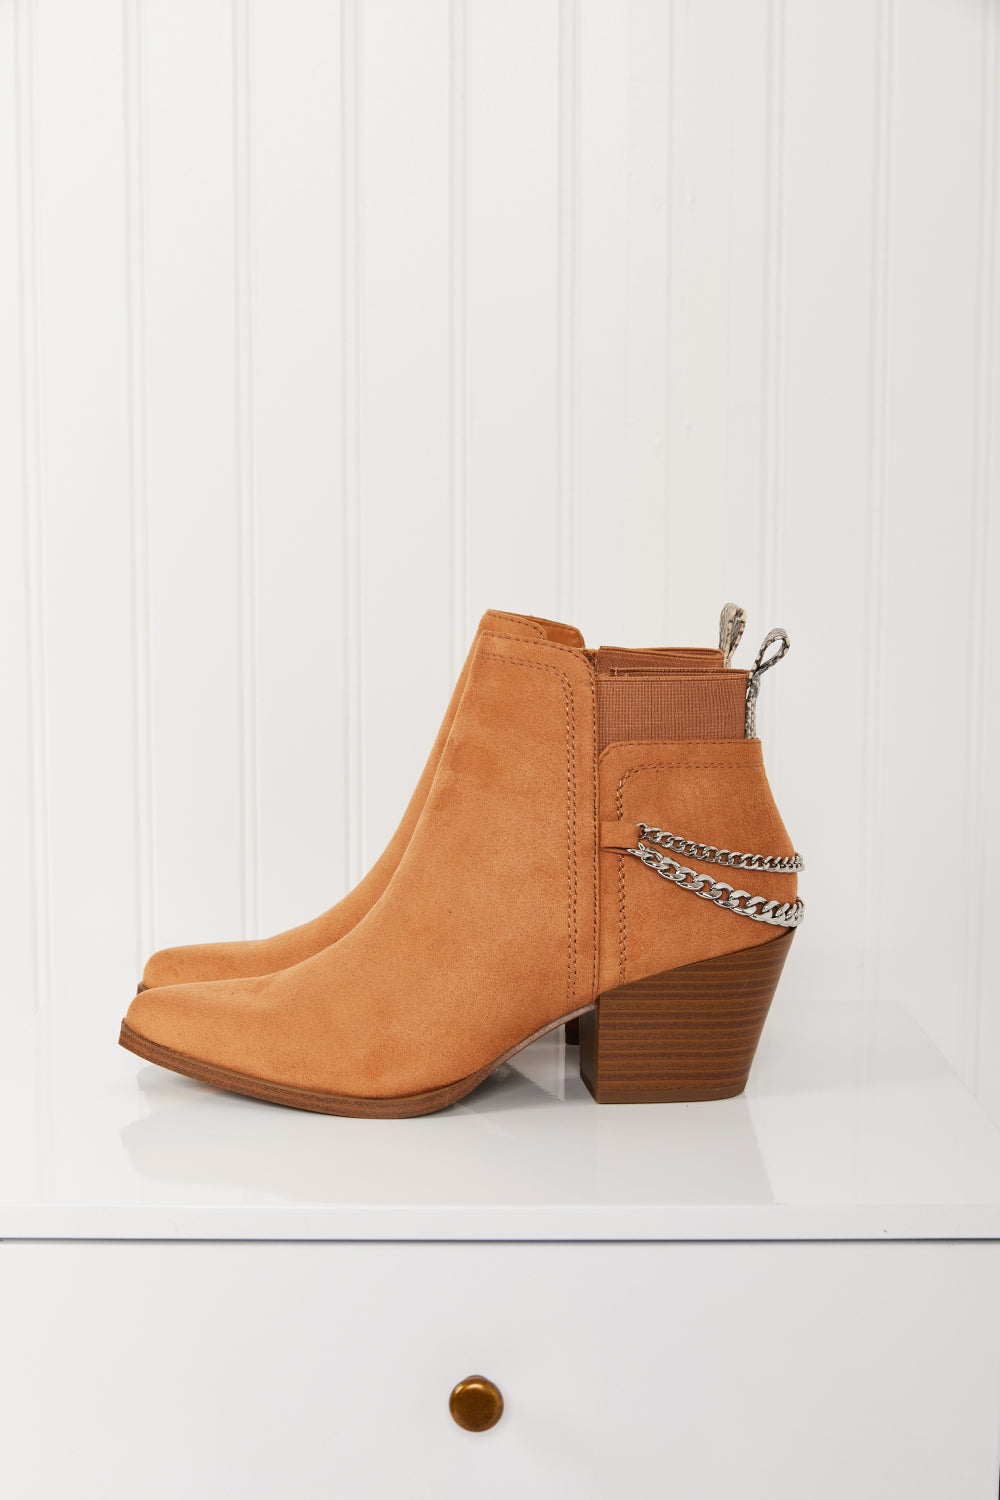 Fortune Dynamic Westside Pointed Toe Chain Detail Ankle Booties